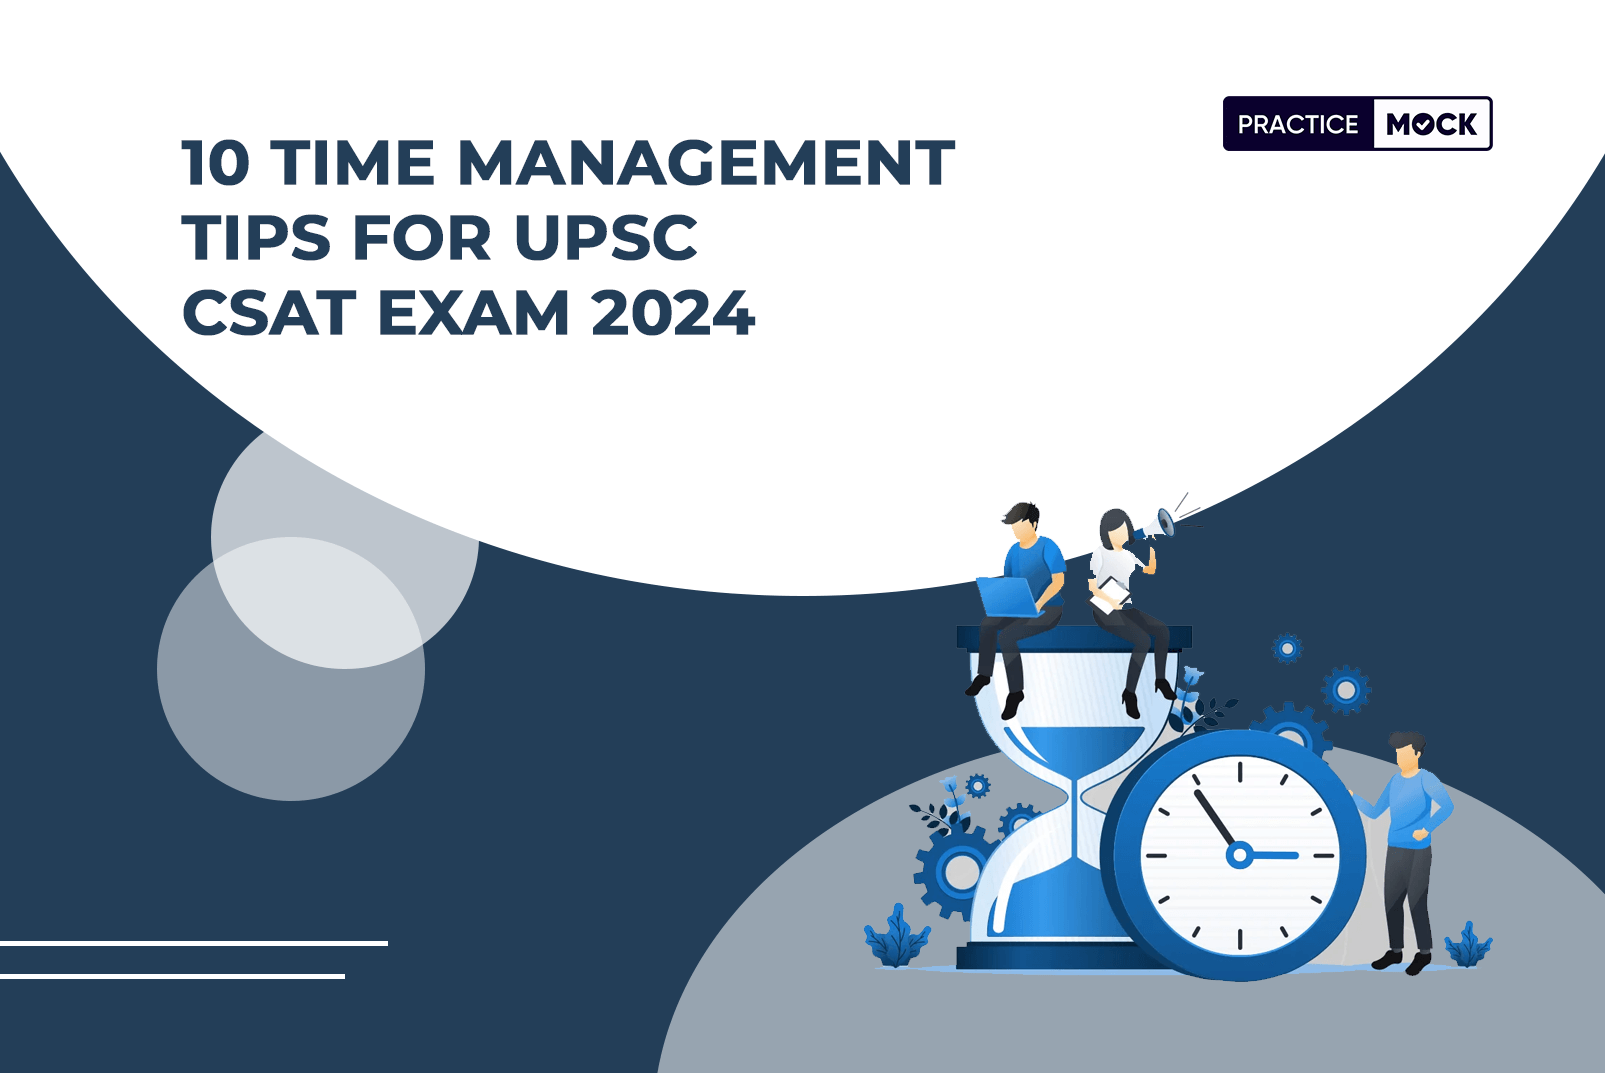 10 Time Management Tips for UPSC CSAT Exam 2024